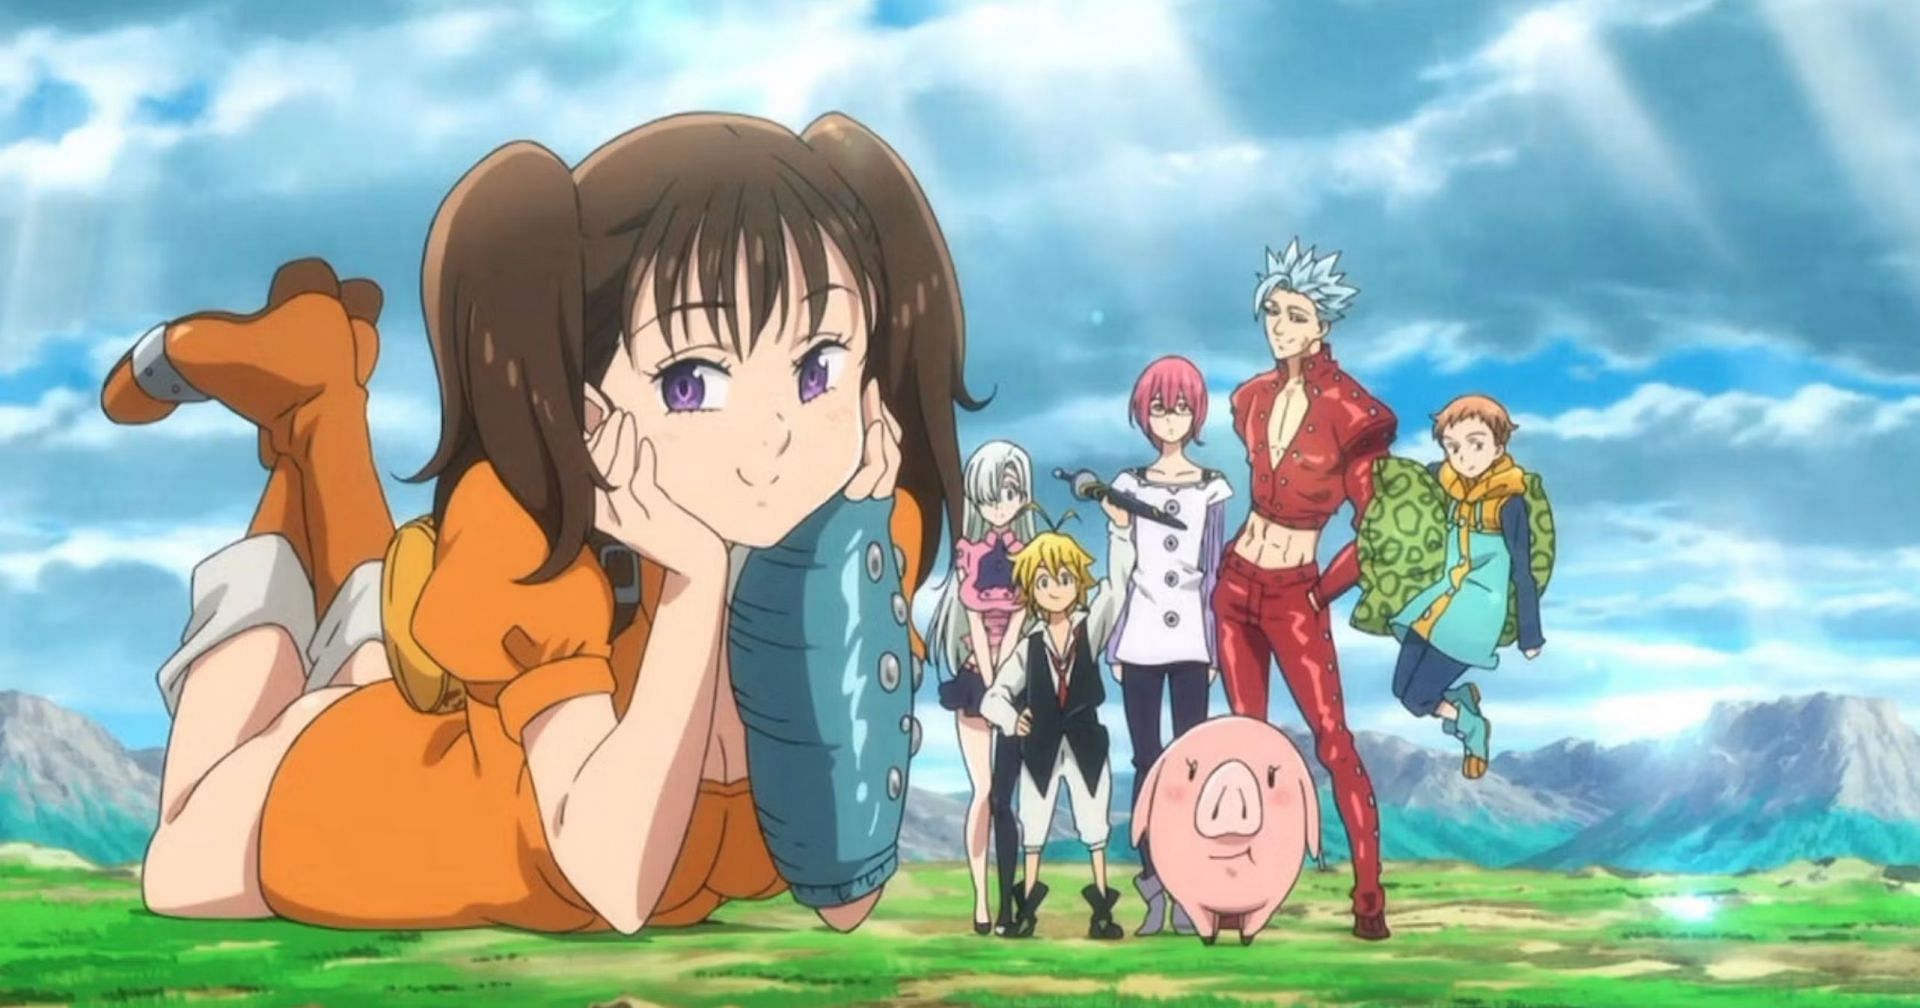 Watch The Seven Deadly Sins the Movie: Prisoners of the Sky